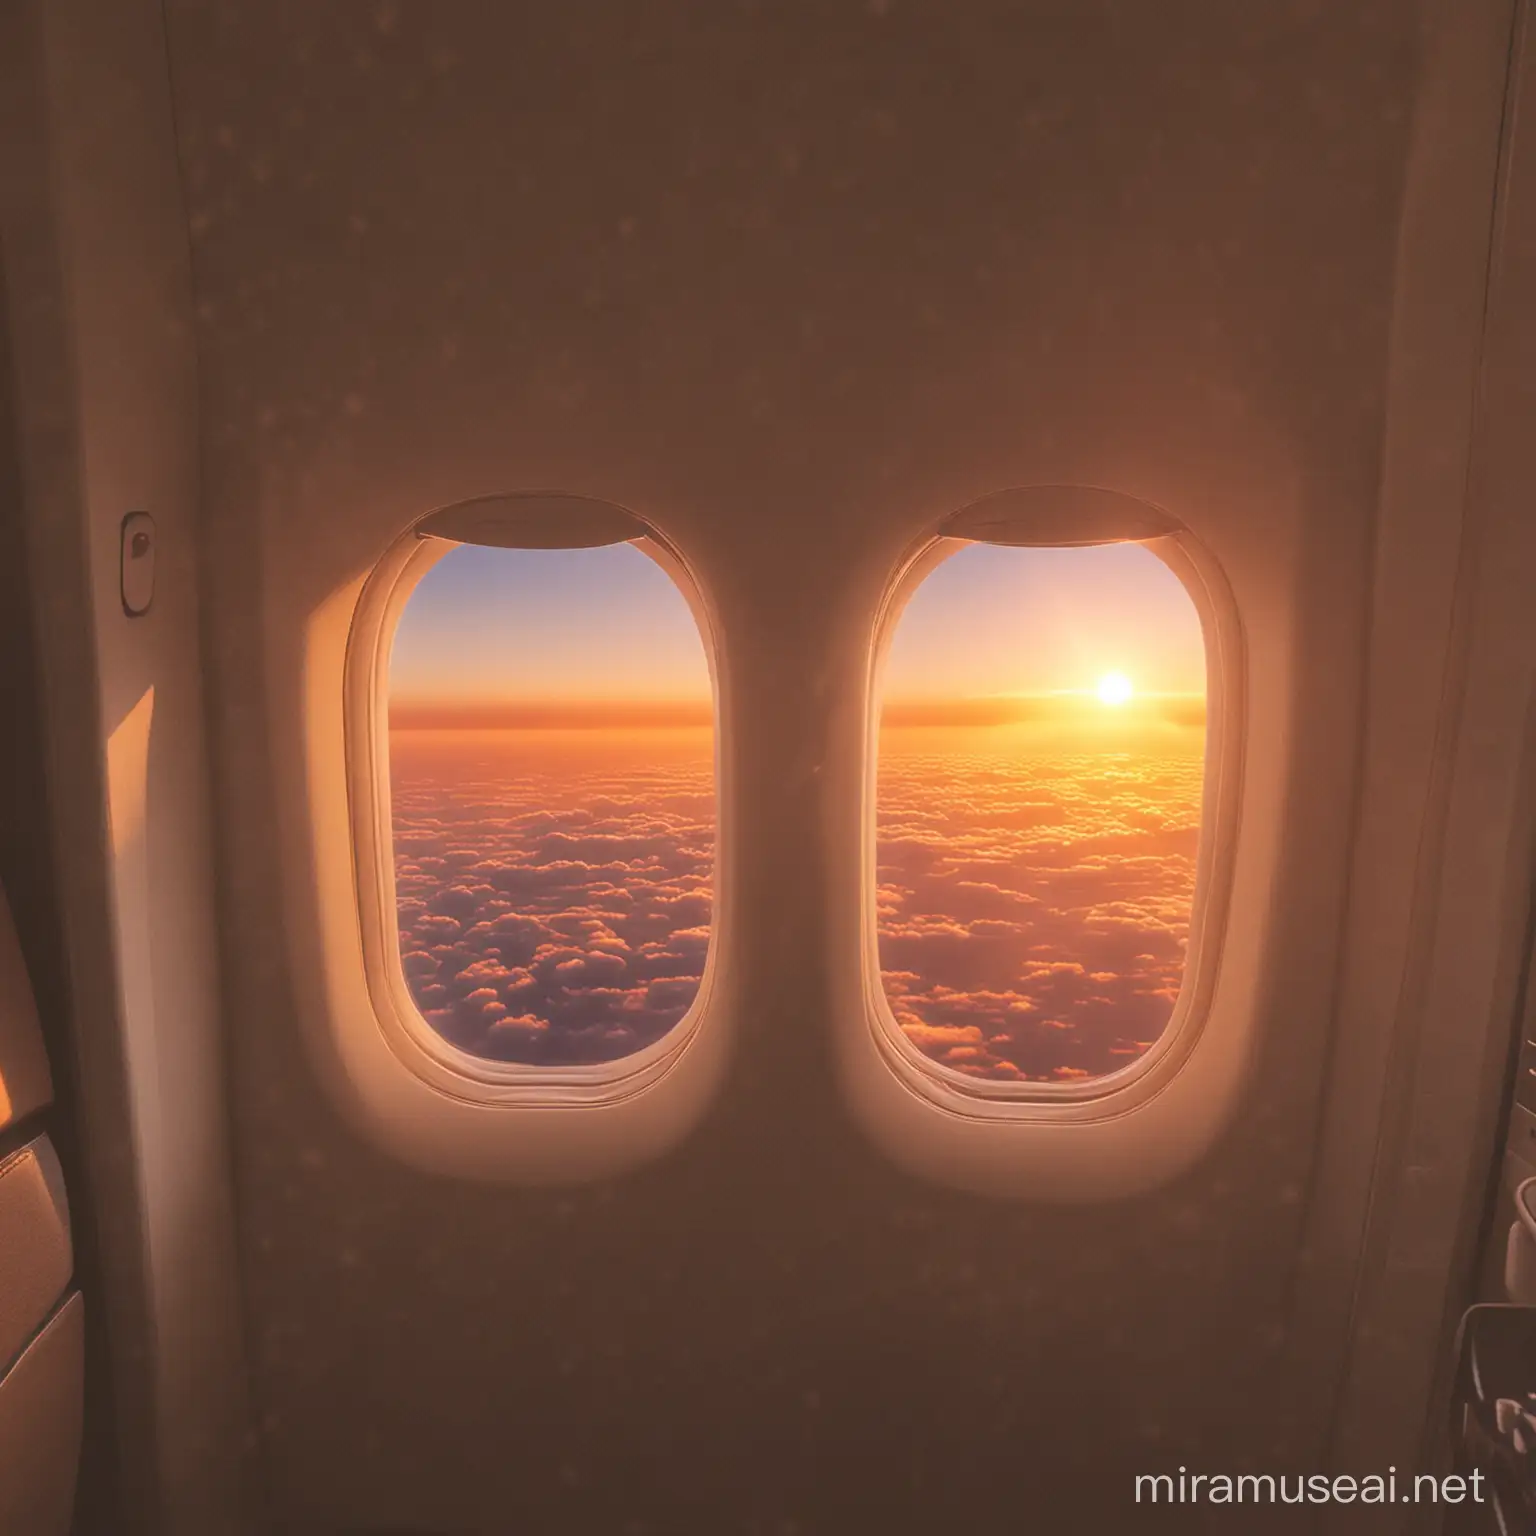 Airplane Cabin Interior with Sunset View and Synced Lighting